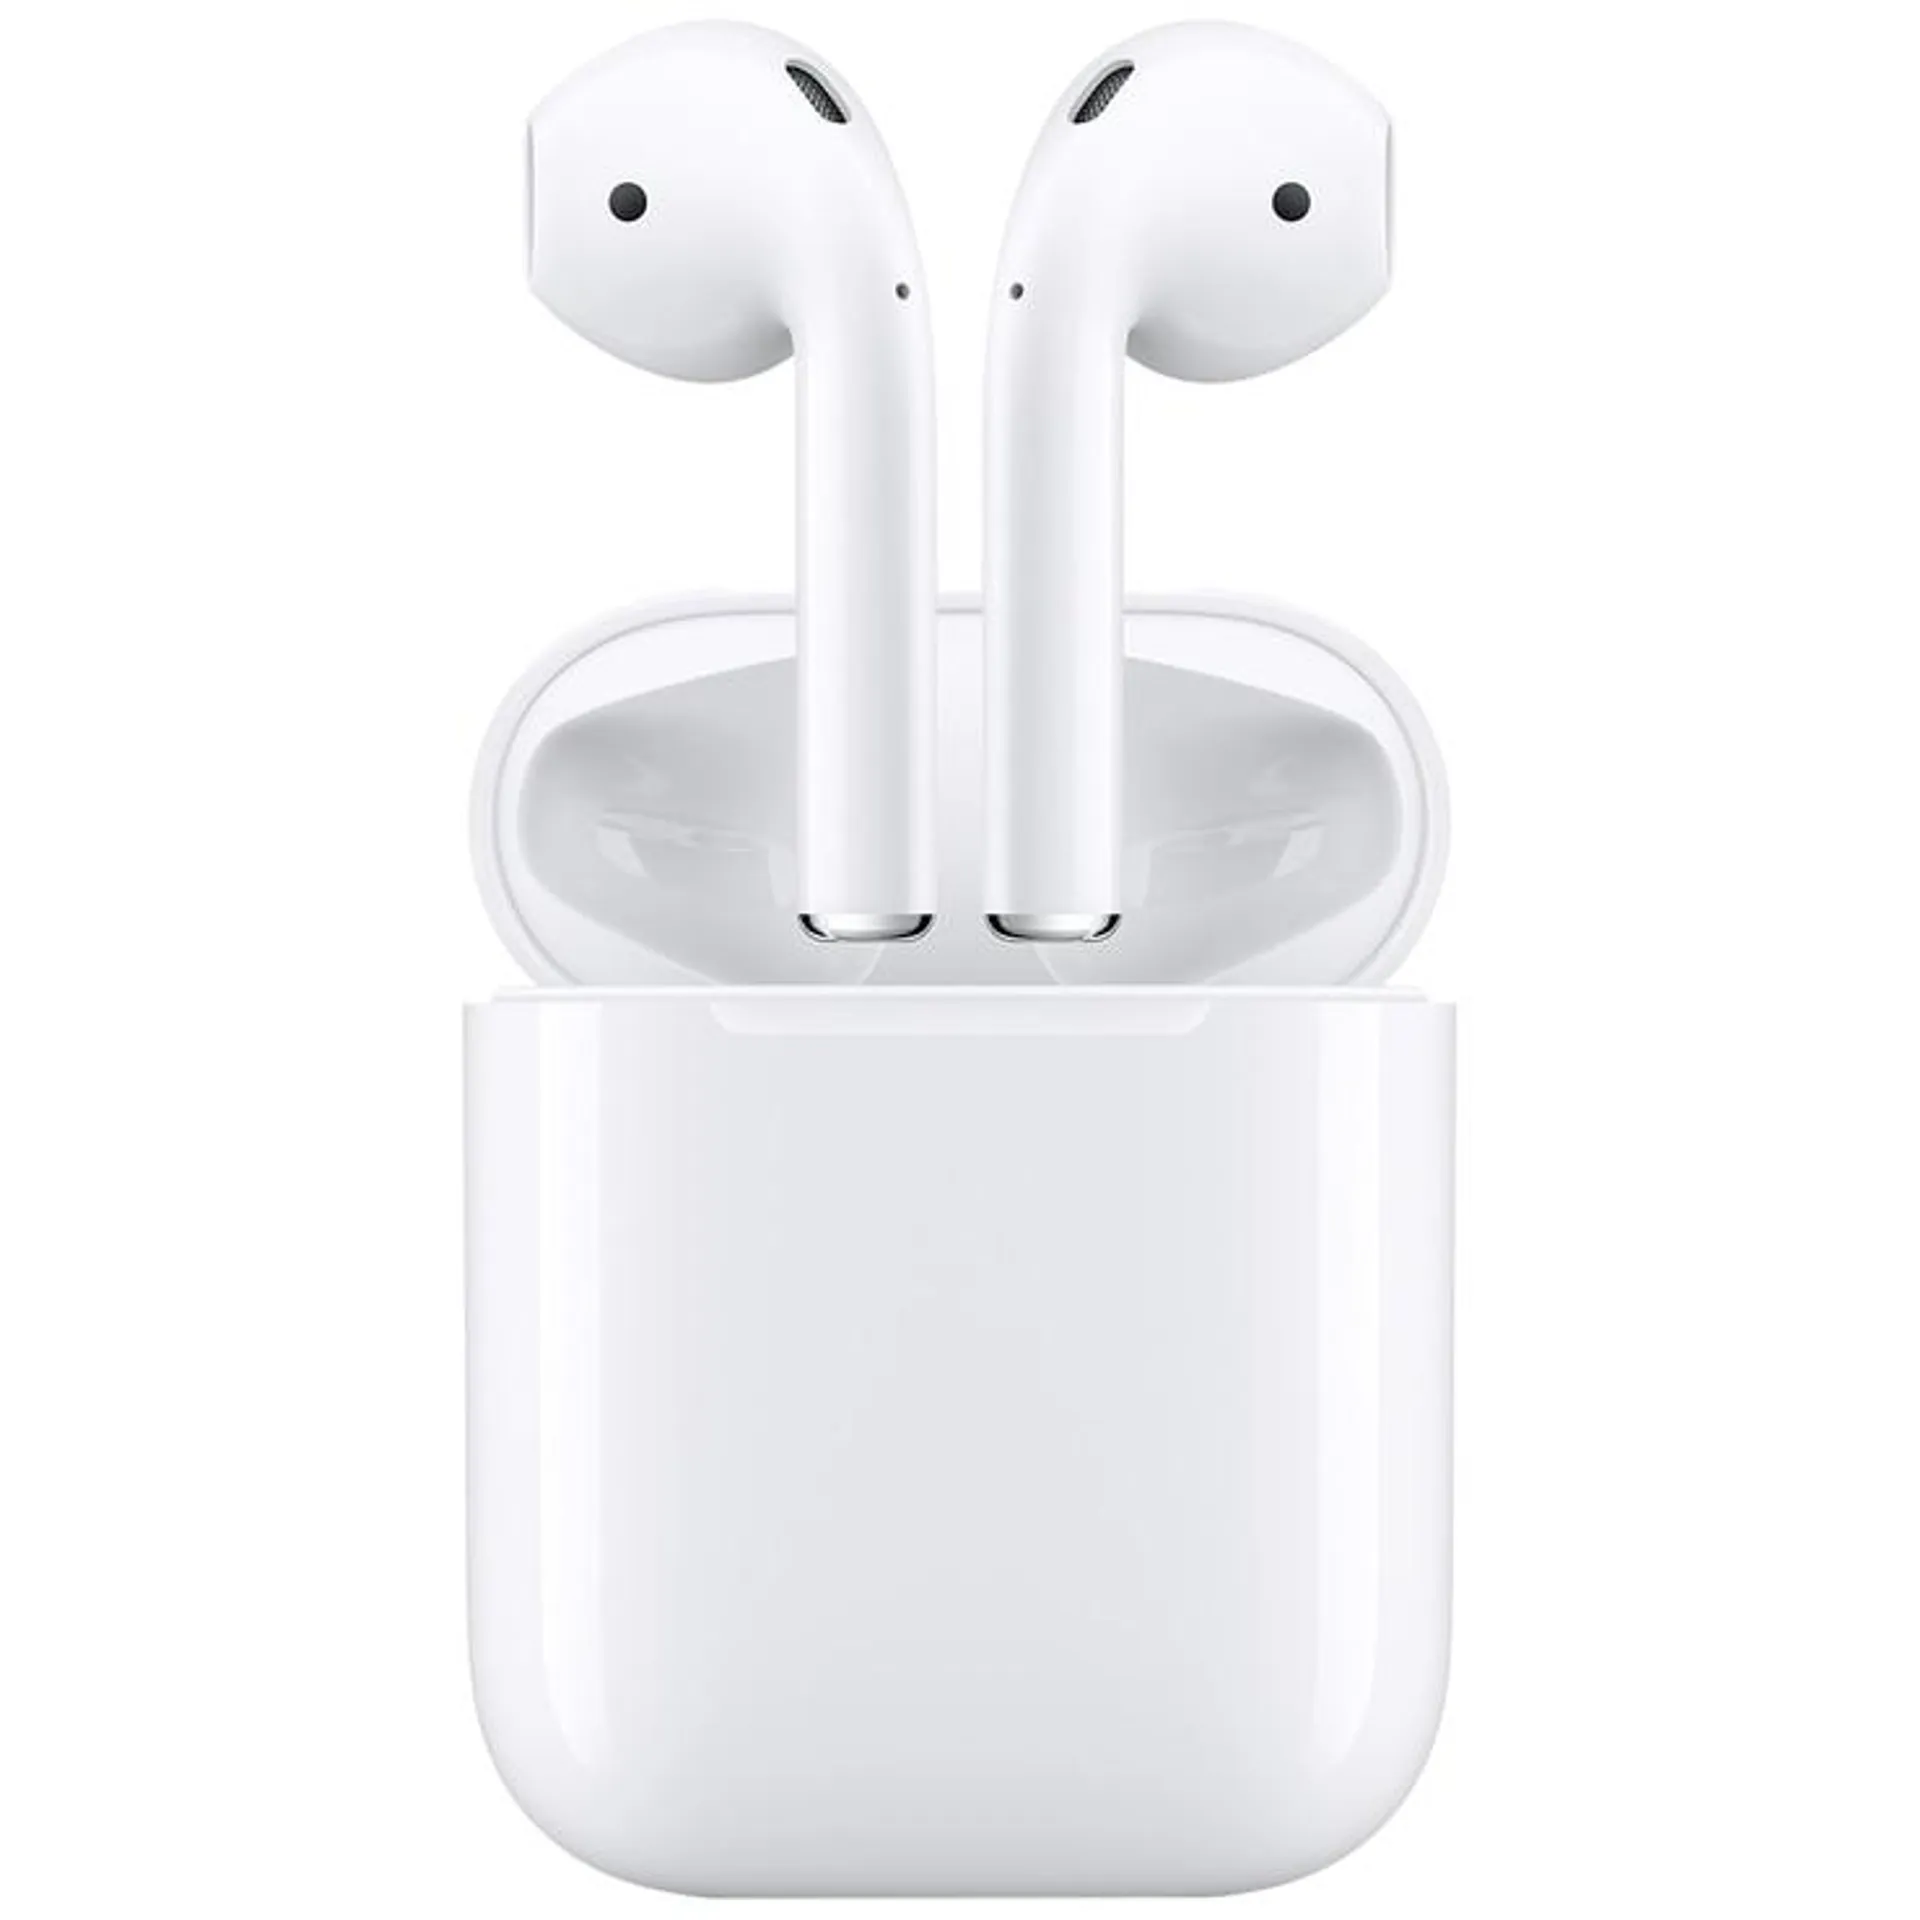 AirPods (2nd Gen) With Charging Case